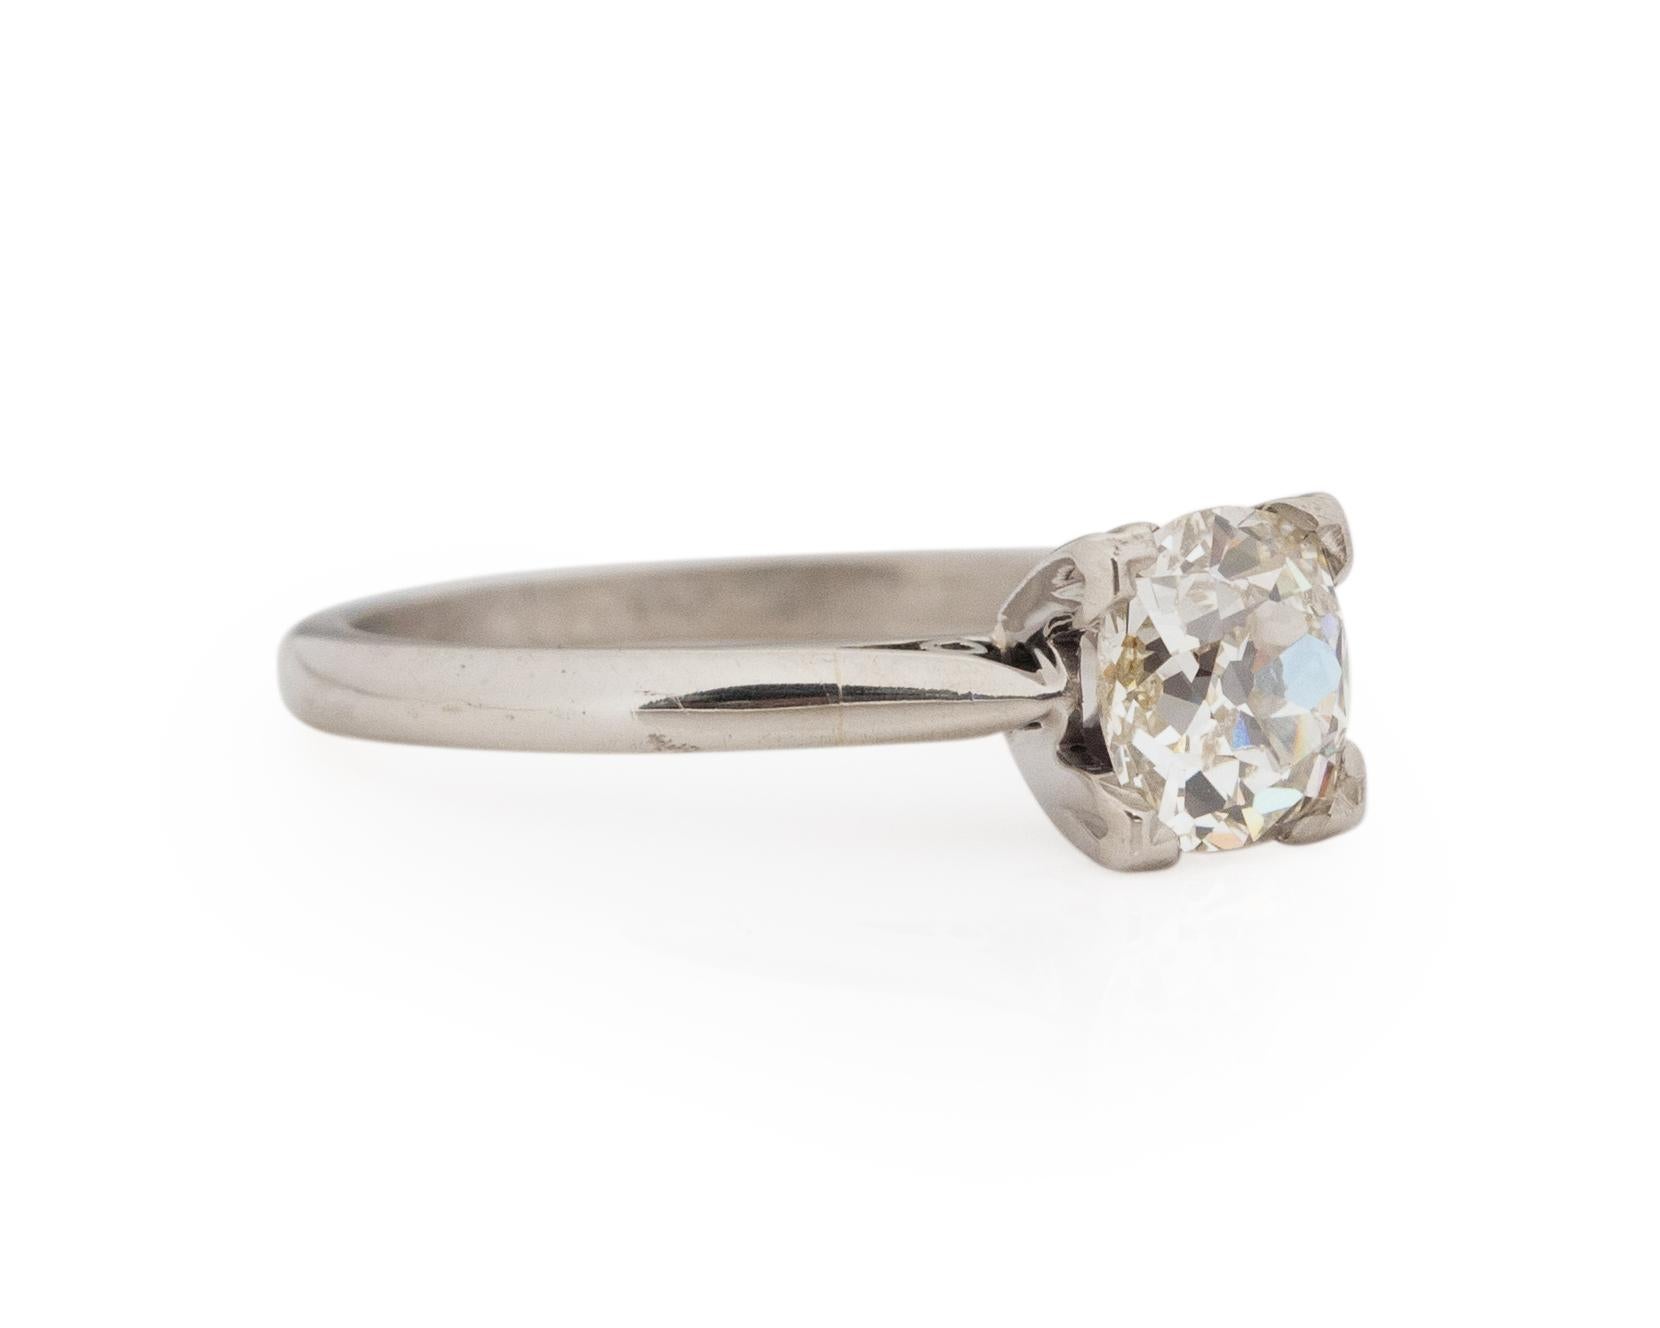 Ring Size: 5.25
Metal Type: Platinum [Hallmarked, and Tested]
Weight: 2.5 grams

Center Diamond Details:
GIA REPORT #: 6217872784
Weight: .98carat
Cut: Antique Cushion
Color: K
Clarity: SI2
Measurements: 6.21mm x 5.76mm x 3.65mm

Finger to Top of